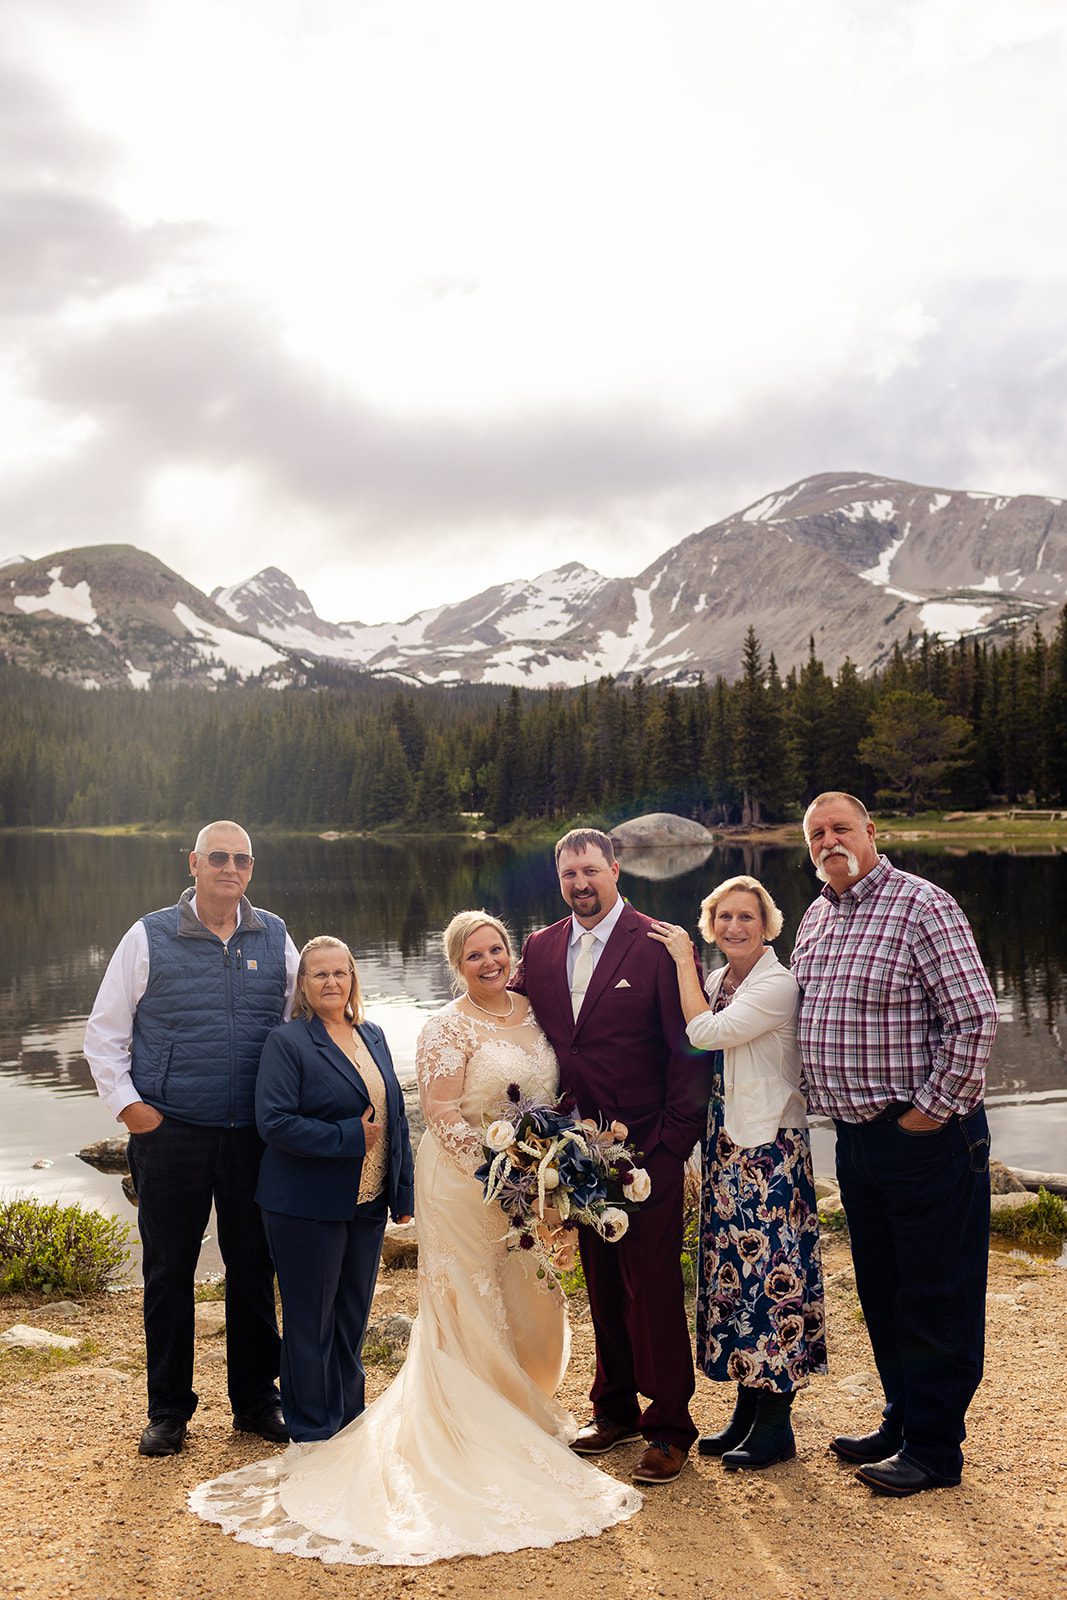 A family photo after the wedding at Brainard Lake.